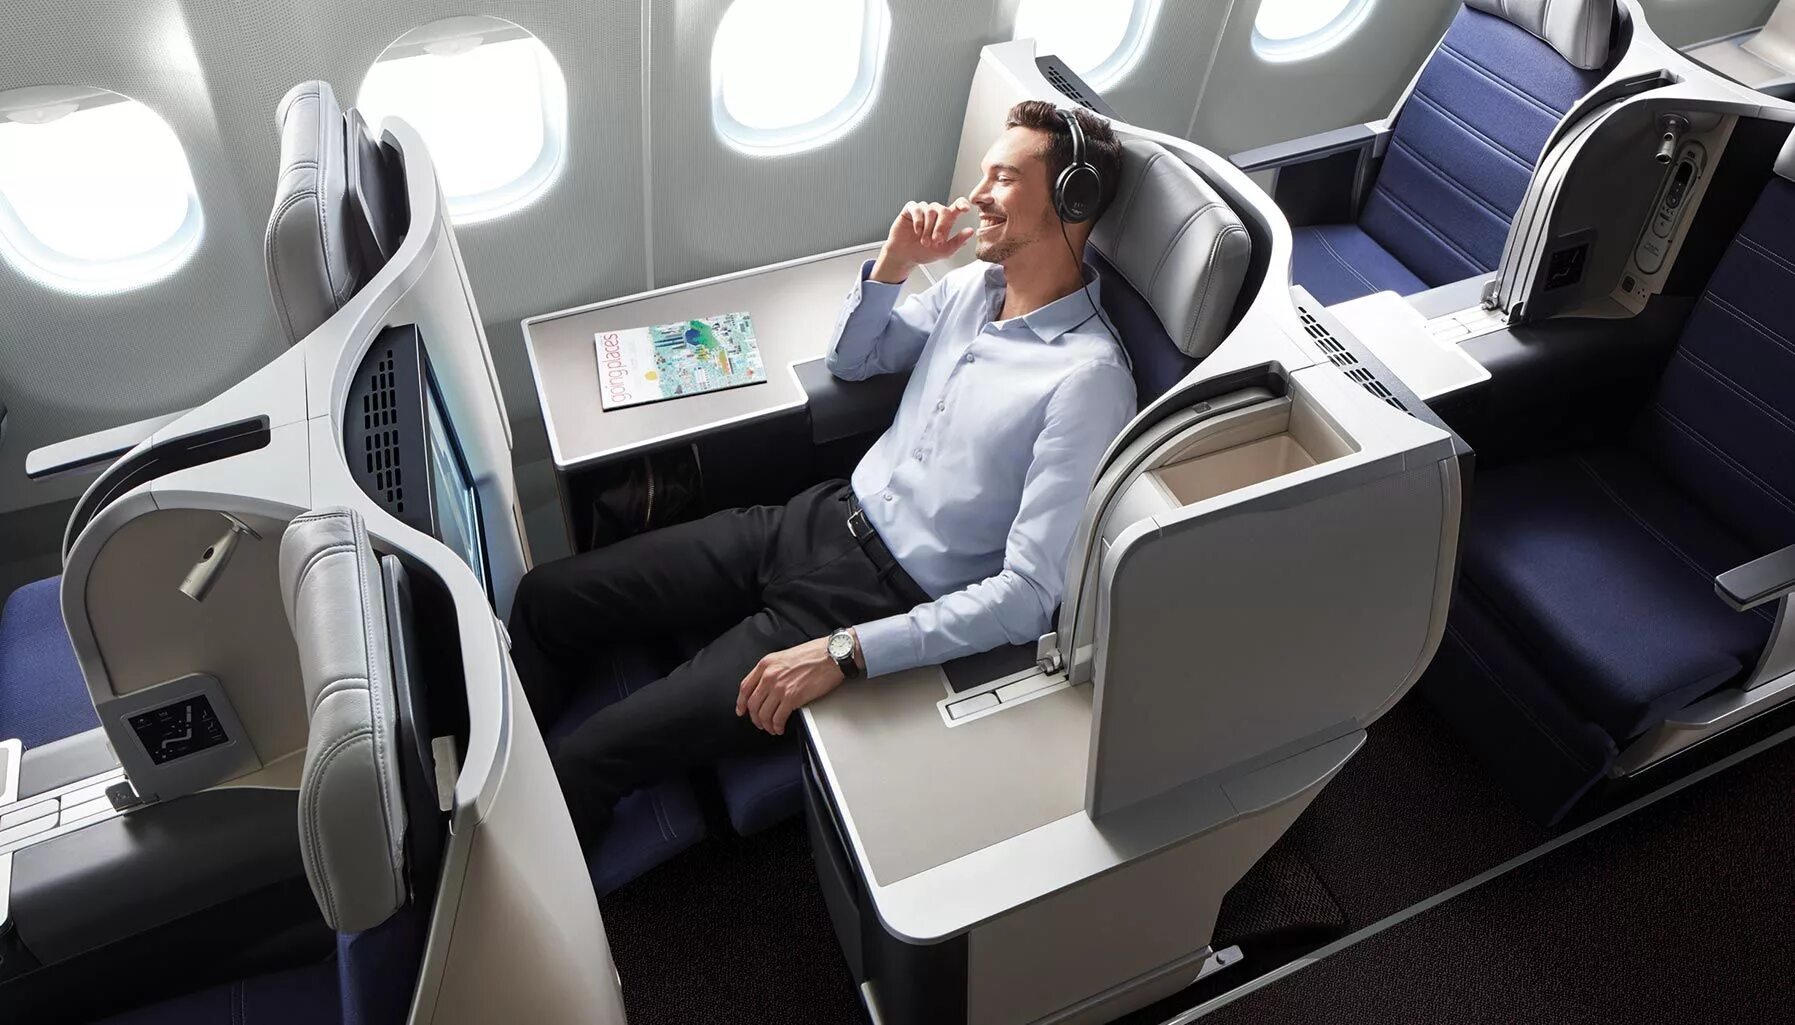 Airbus a350 бизнес класс. Malaysia Airlines Airbus a330 Business class. A350 first class. British Airways Business class Airbus. Бизнес класс регистрация